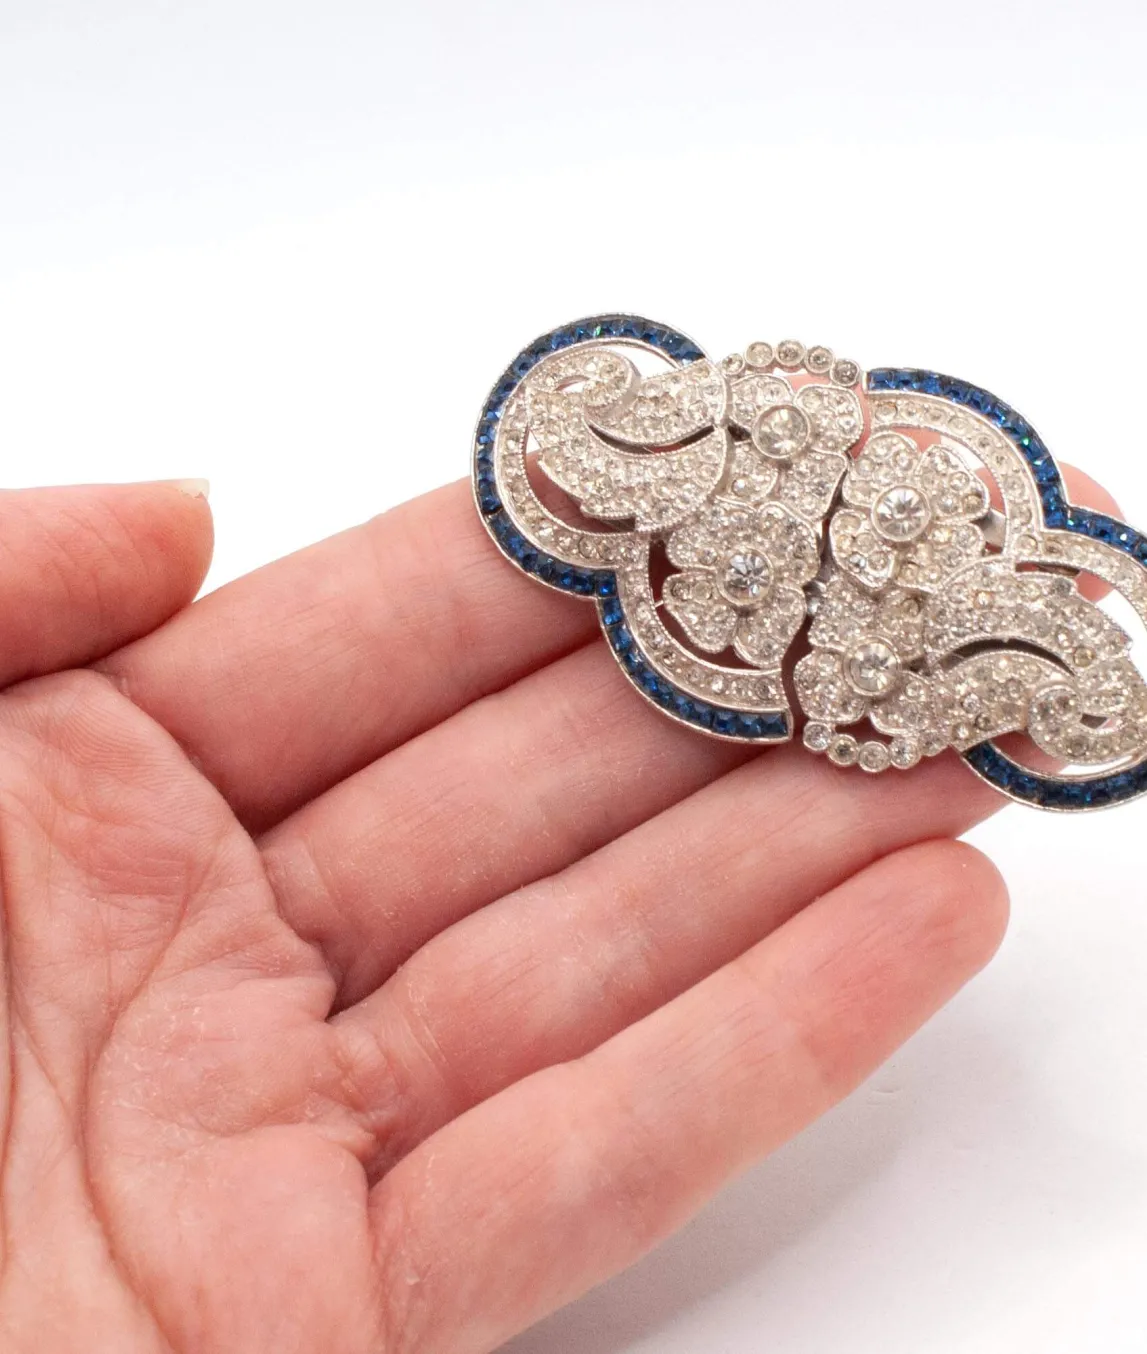 Art Deco Floral Double Clip Brooch held in a hand